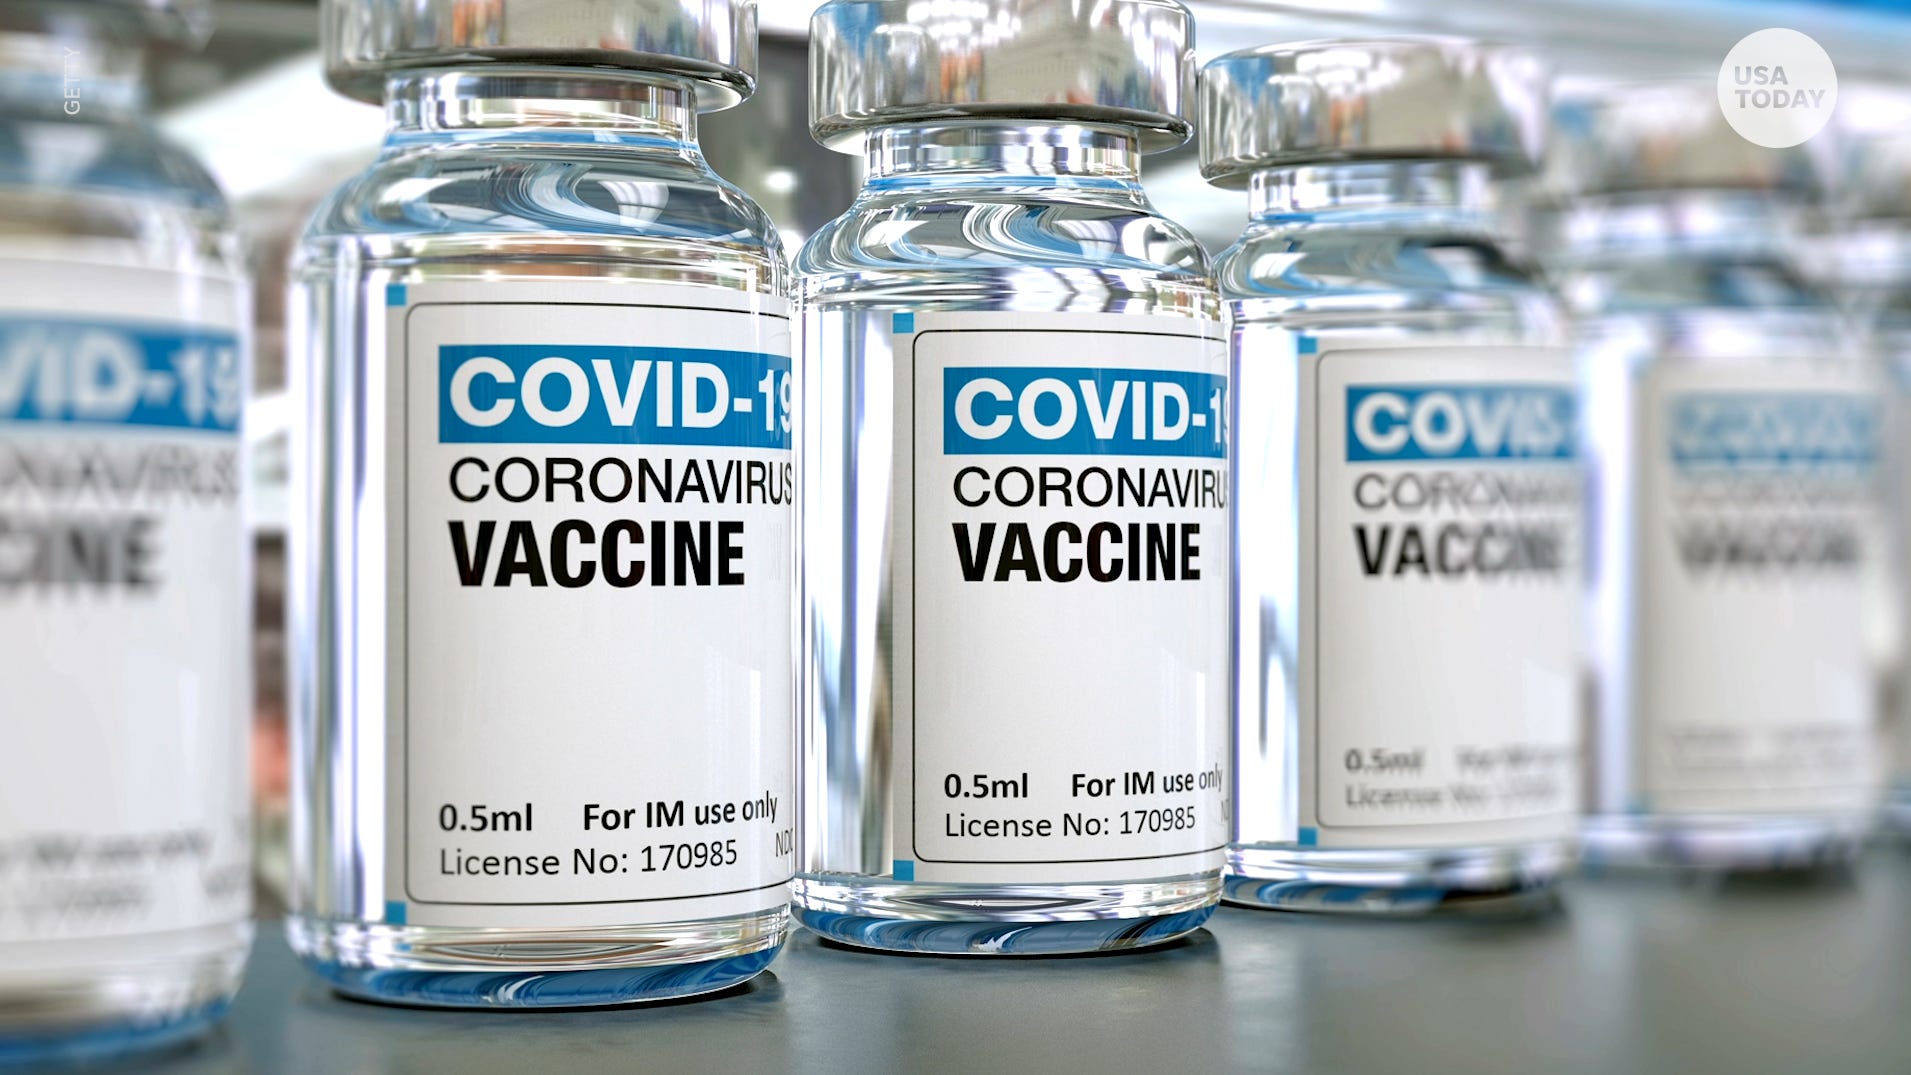 COVID vaccine Once you get it CDC says no quarantining if exposed